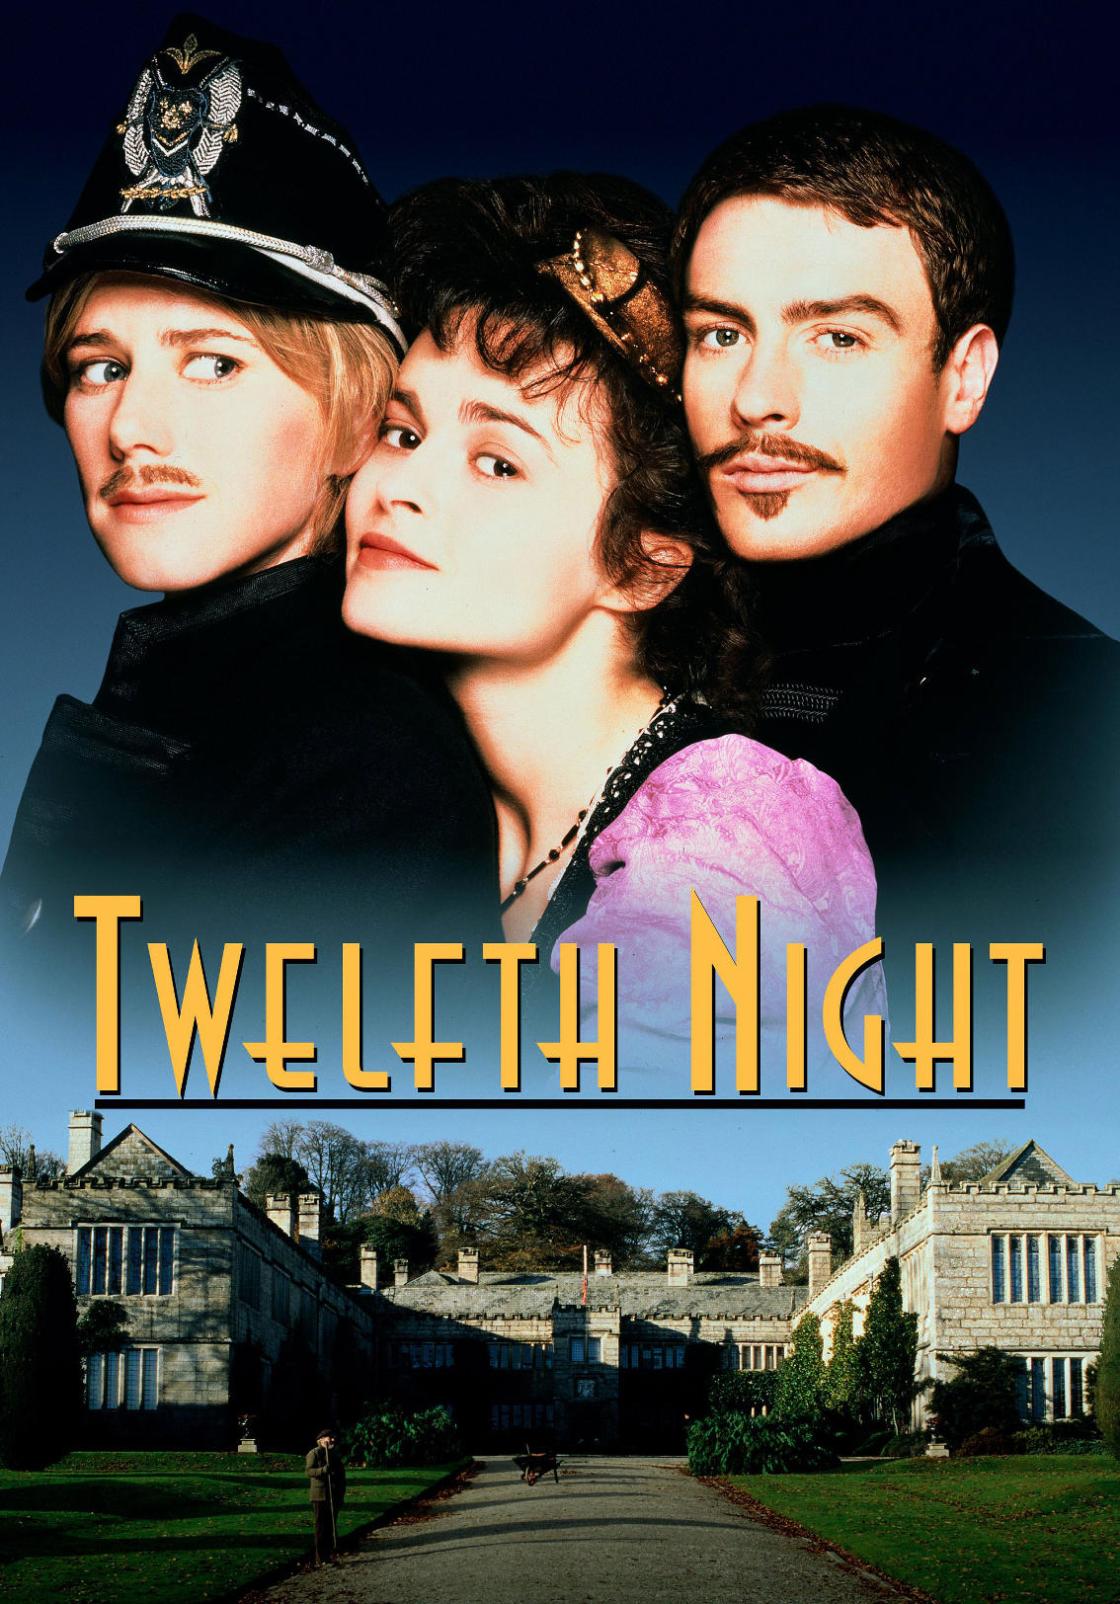 What Is The Significance Of The Play's Title, Twelfth Night?